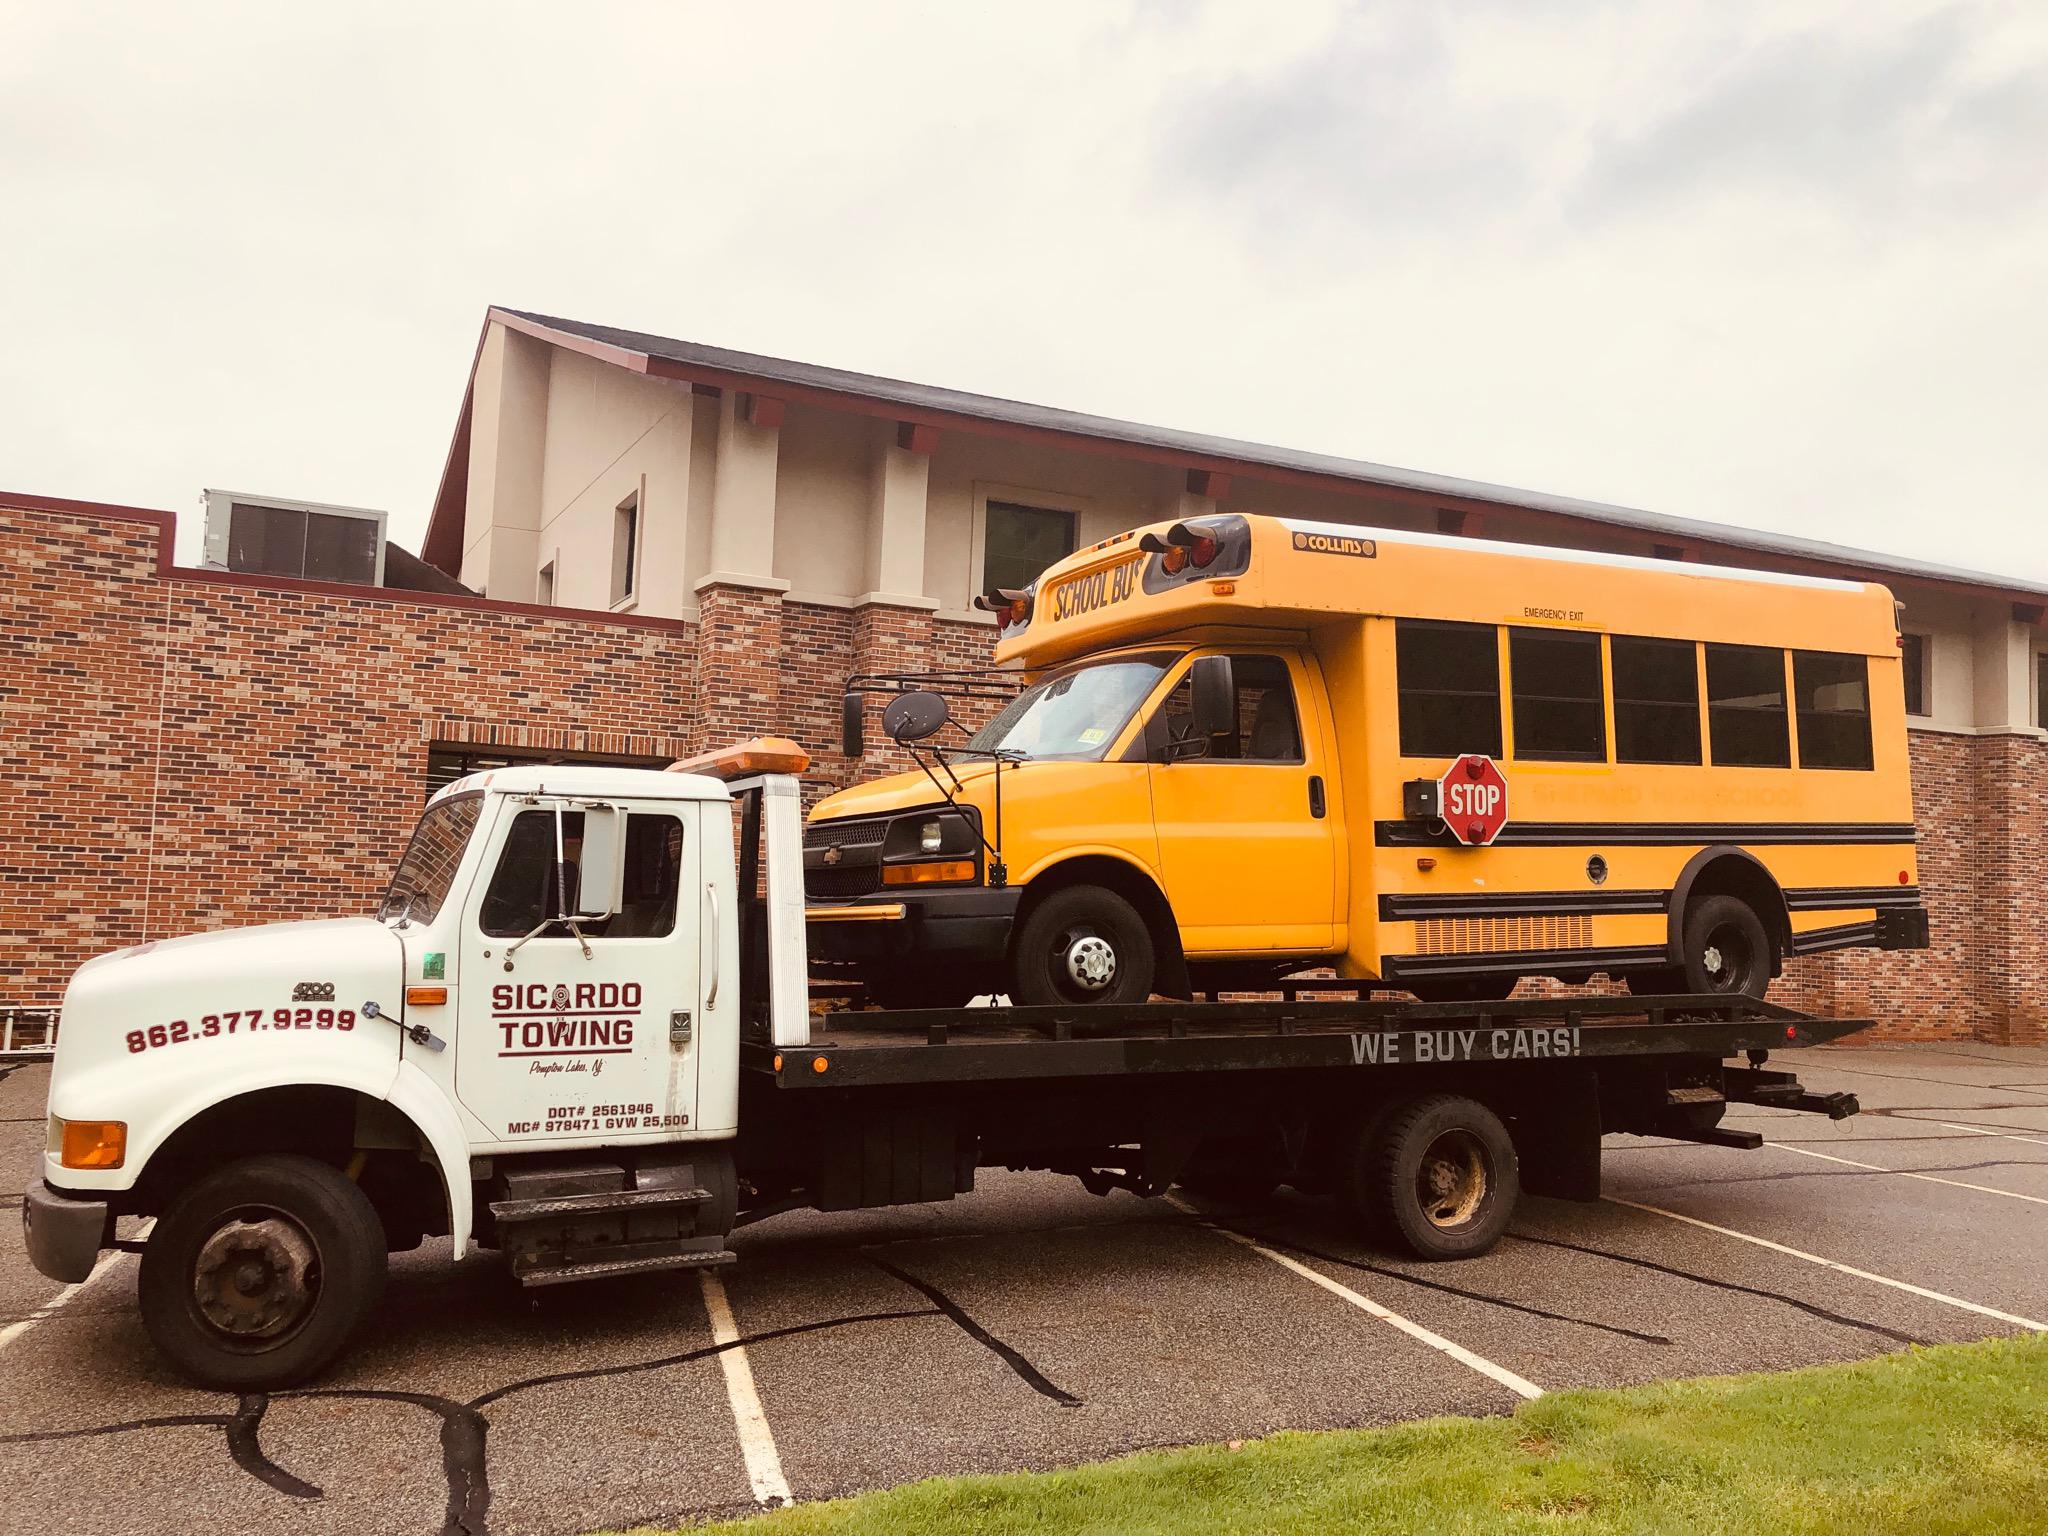 We can even tow some buses and other commercial vehicles!